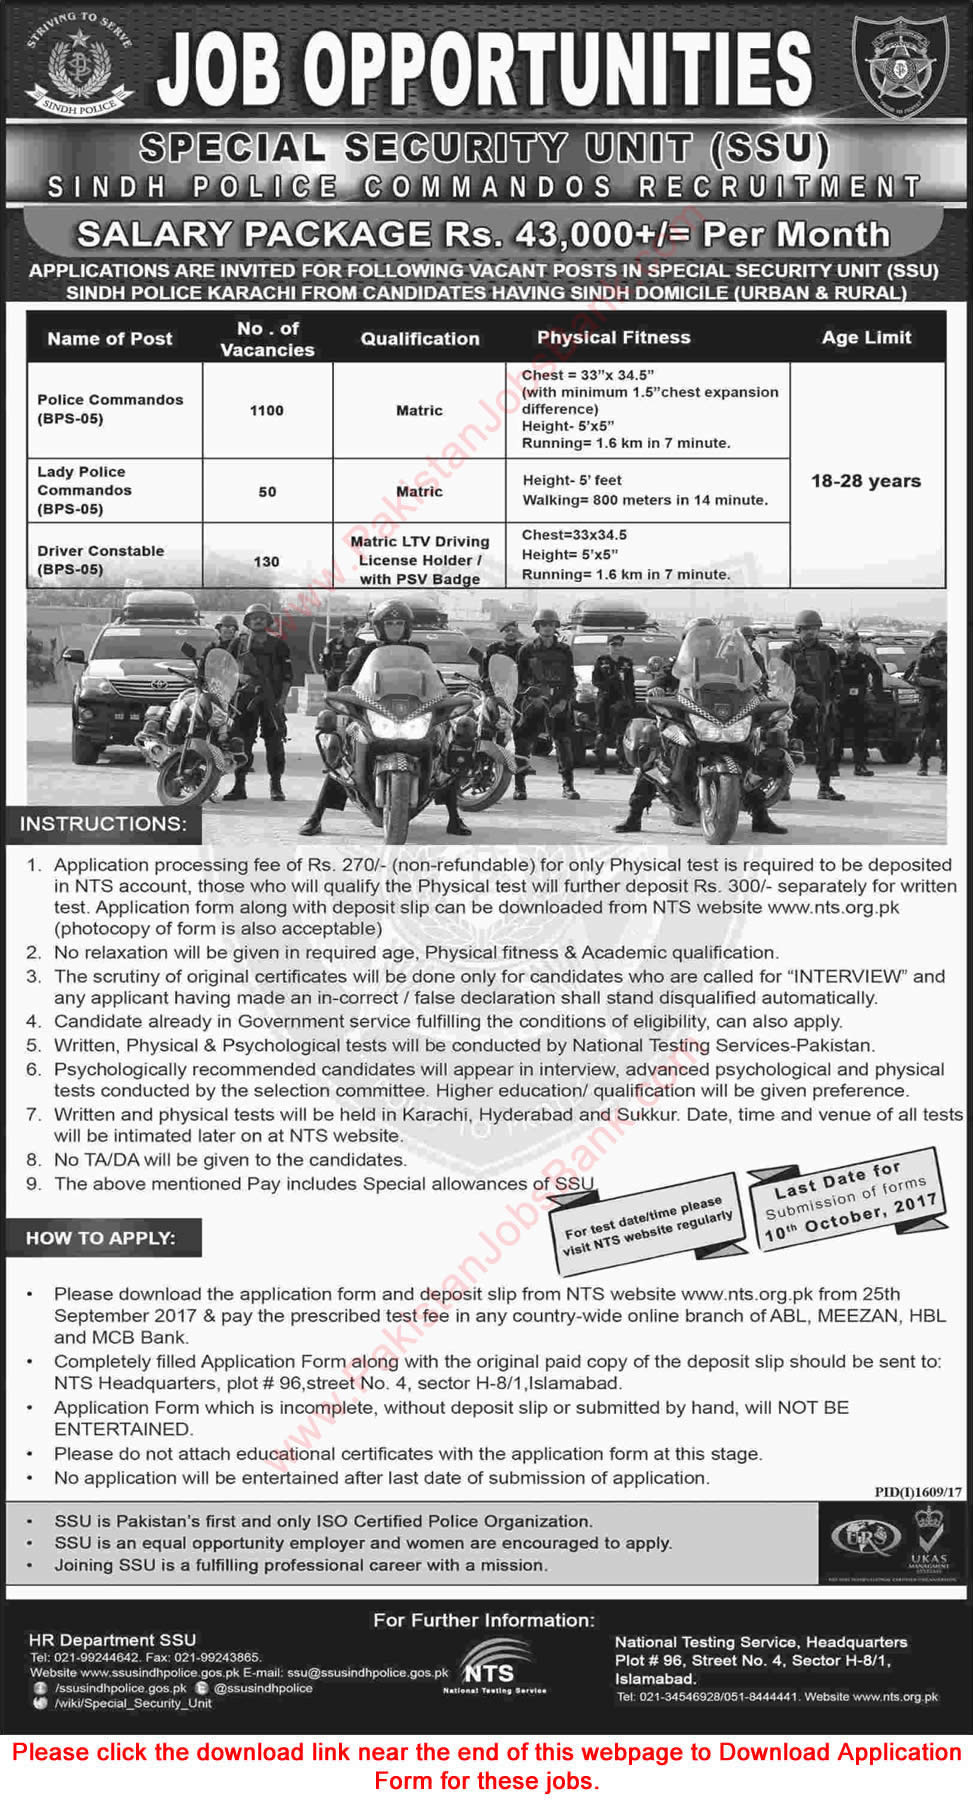 SSU Sindh Police Jobs 2017 September NTS Application Form Police Commandos & Driver Constables Latest / New